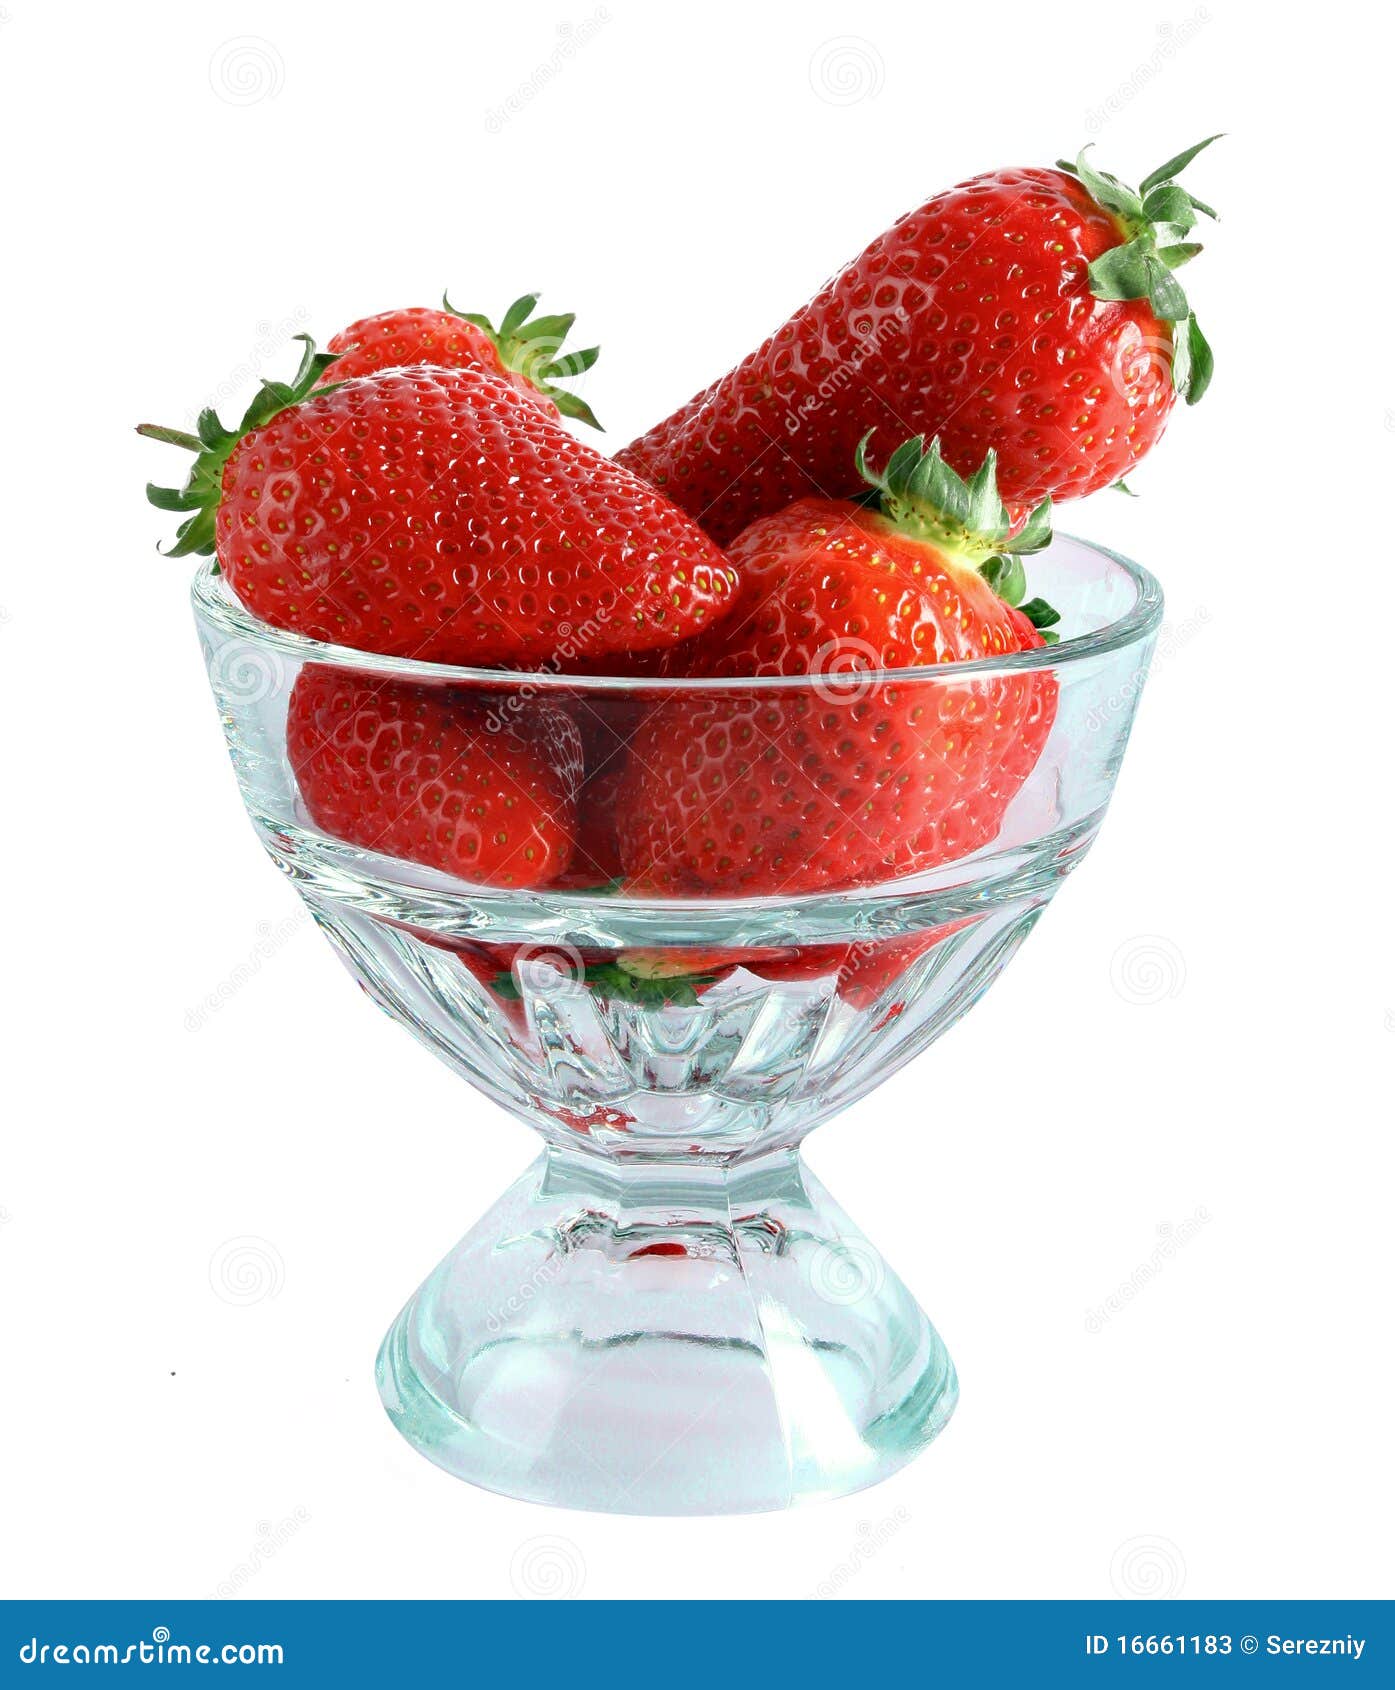 https://thumbs.dreamstime.com/z/few-strawberries-glass-cup-isolated-16661183.jpg